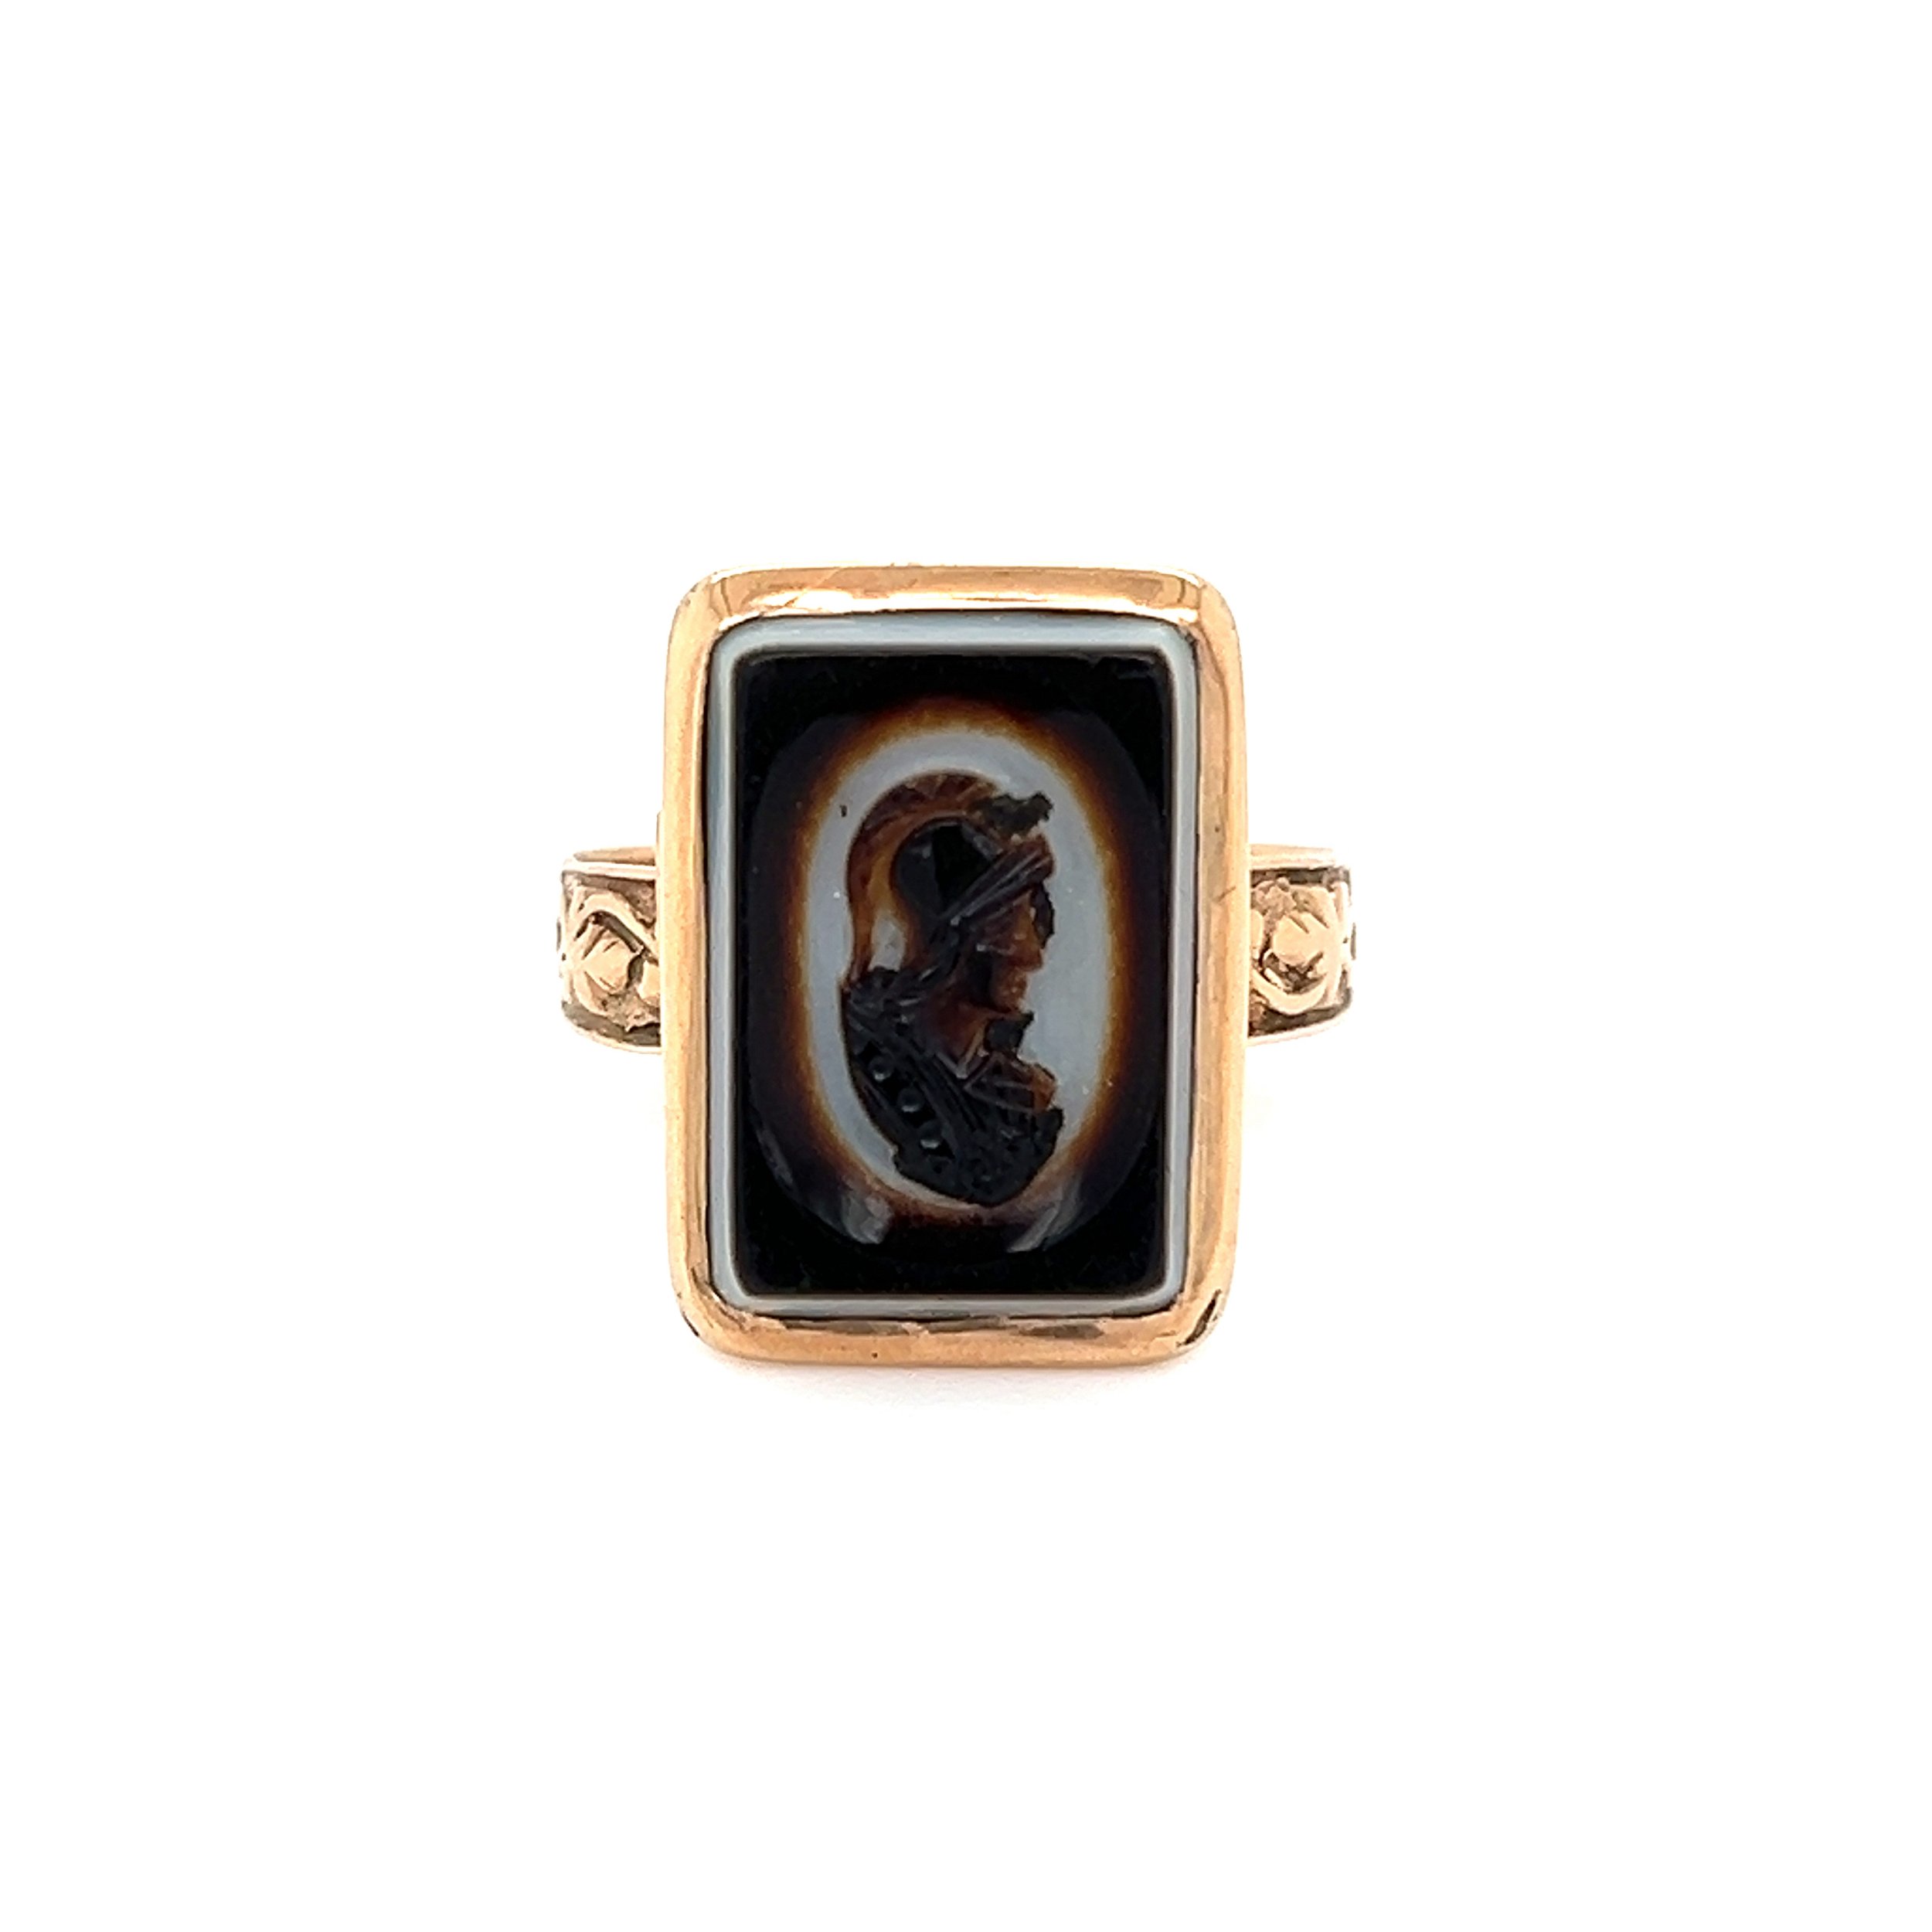 12K YG Victorian Carved Square Onyx Intaglio Ring 3.5g, s7.25